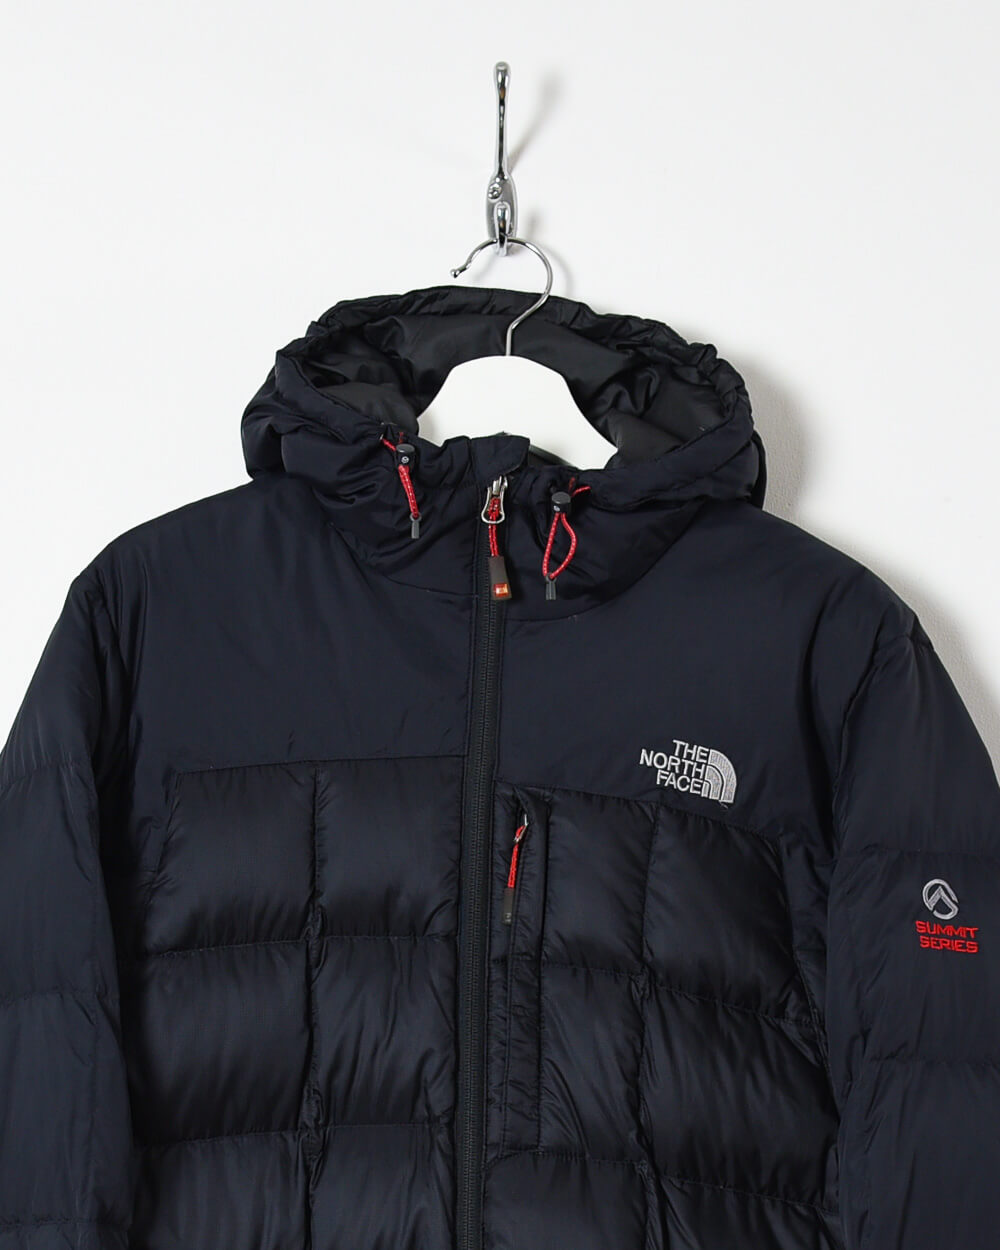 The North Face Summit Series Hooded Puffer Jacket - Medium - Domno Vintage 90s, 80s, 00s Retro and Vintage Clothing 